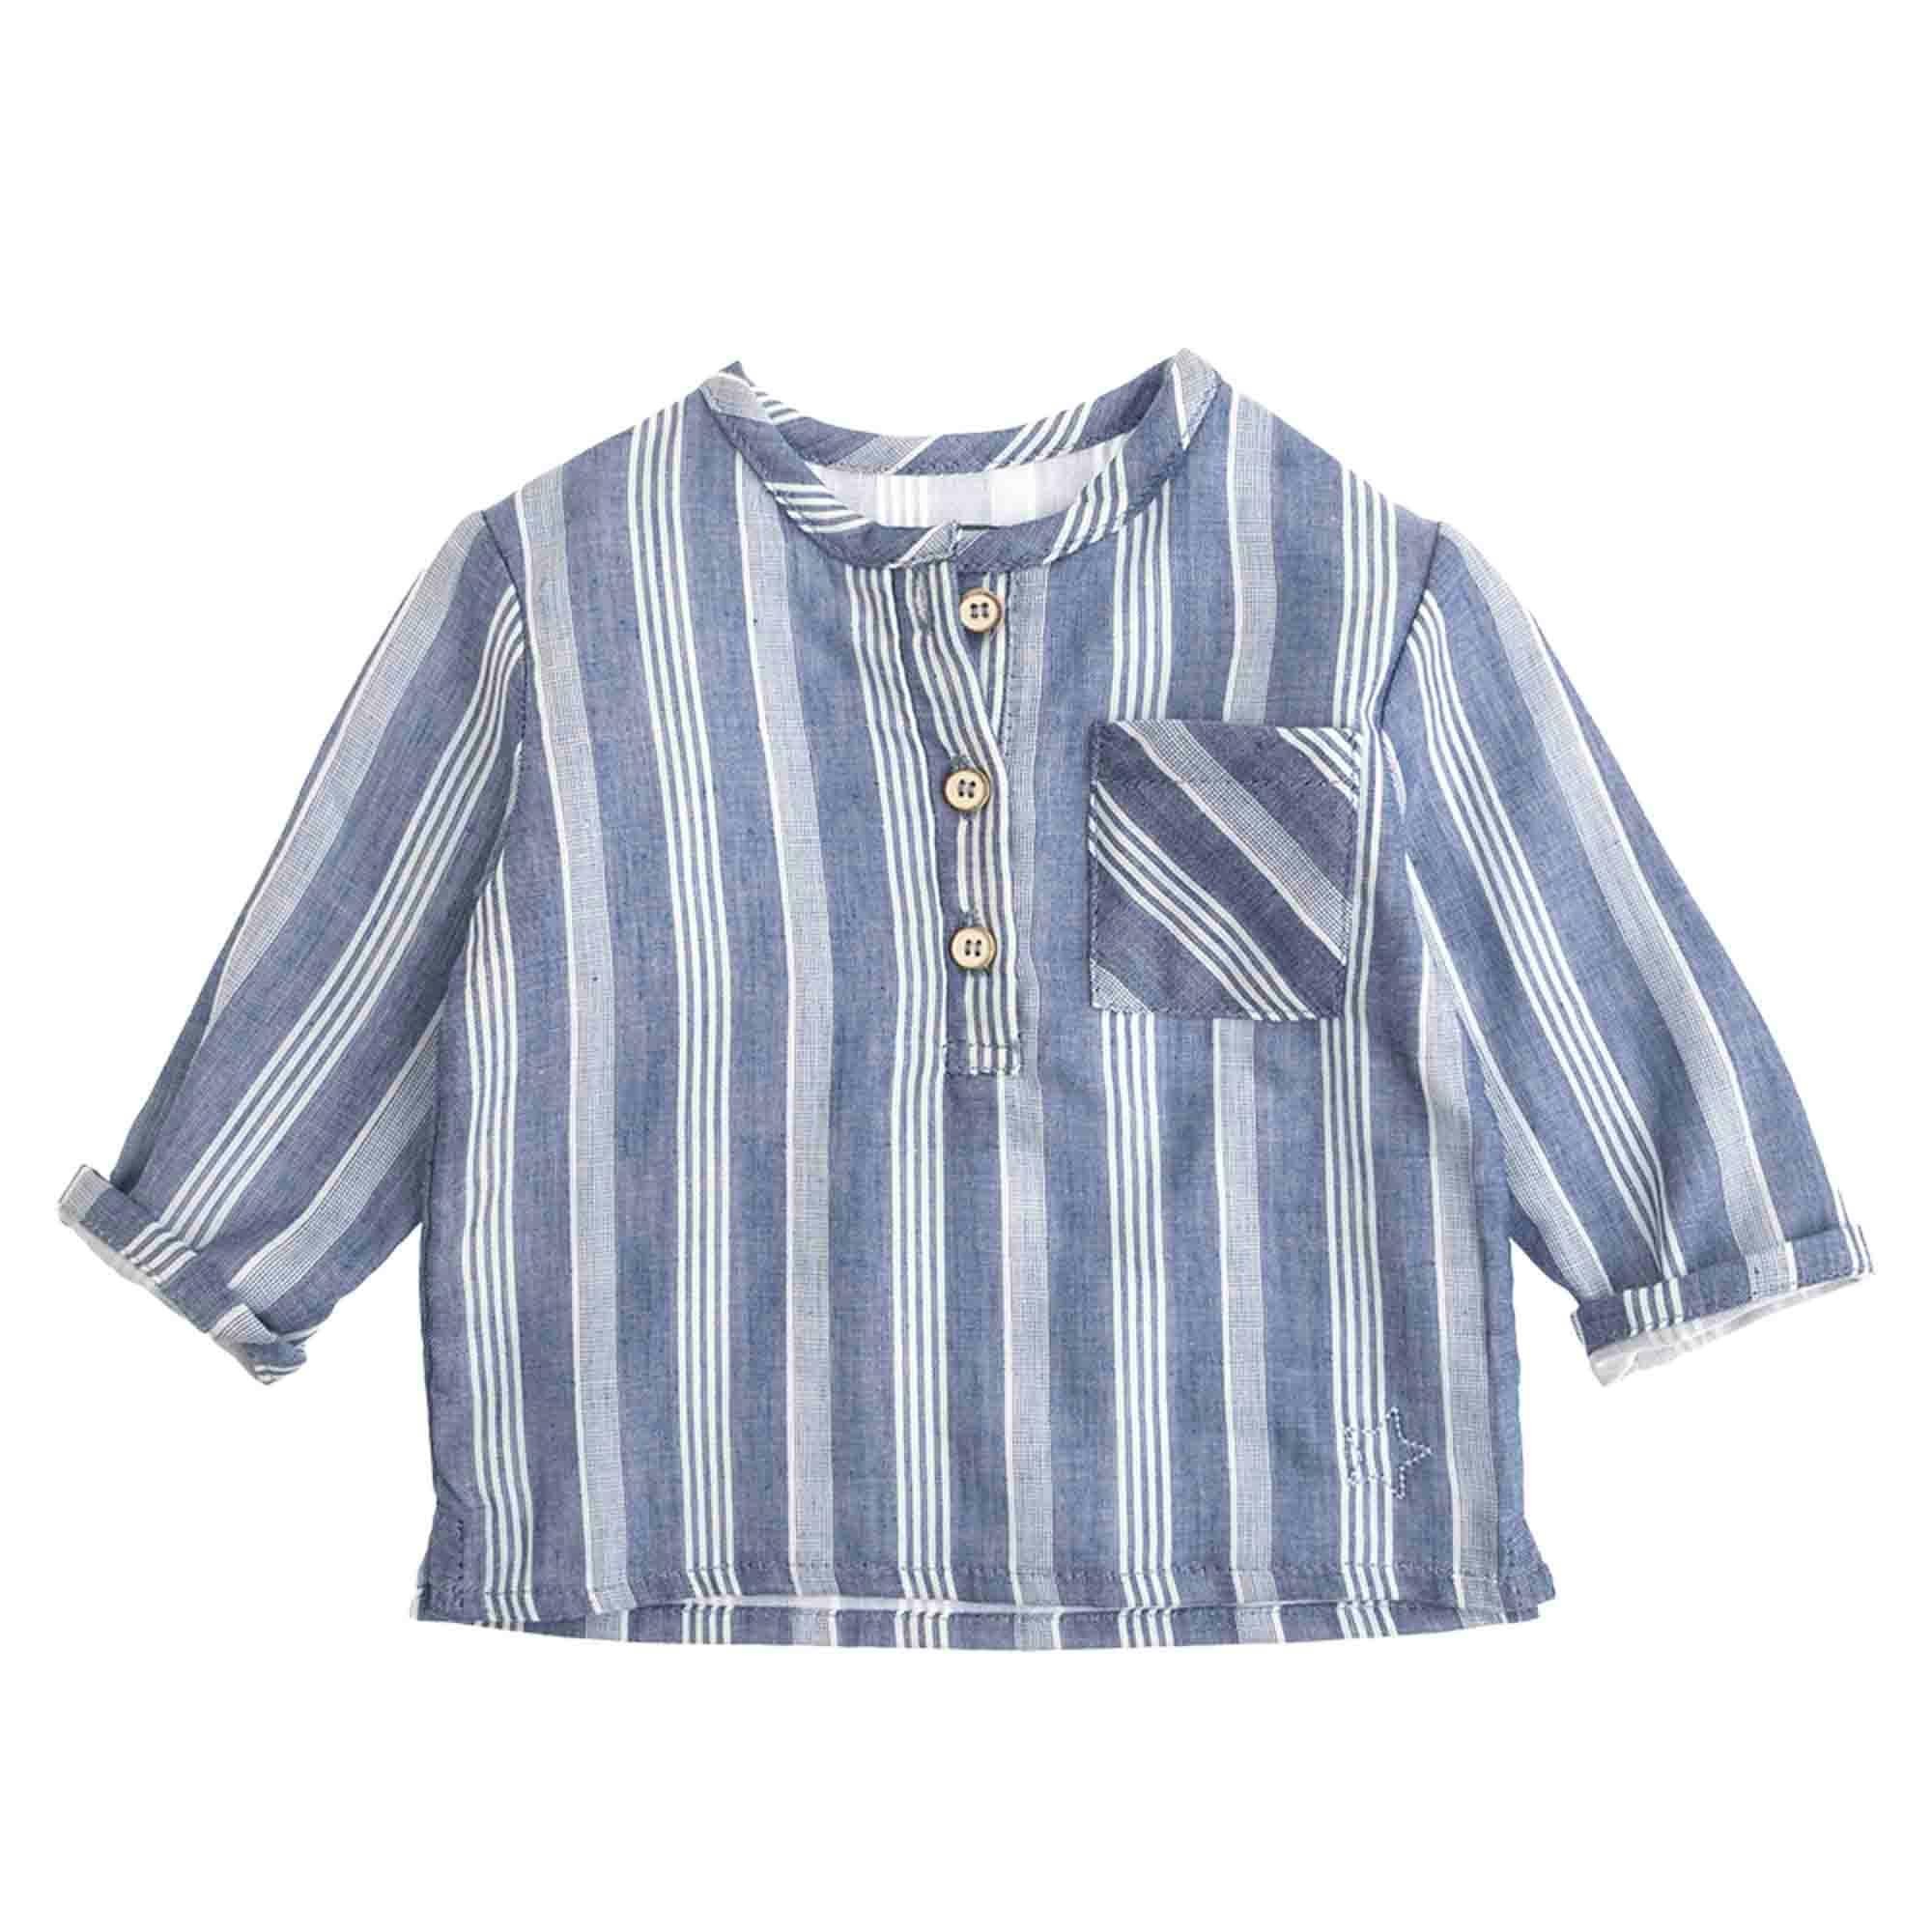 STRIPPED BABY SHIRT